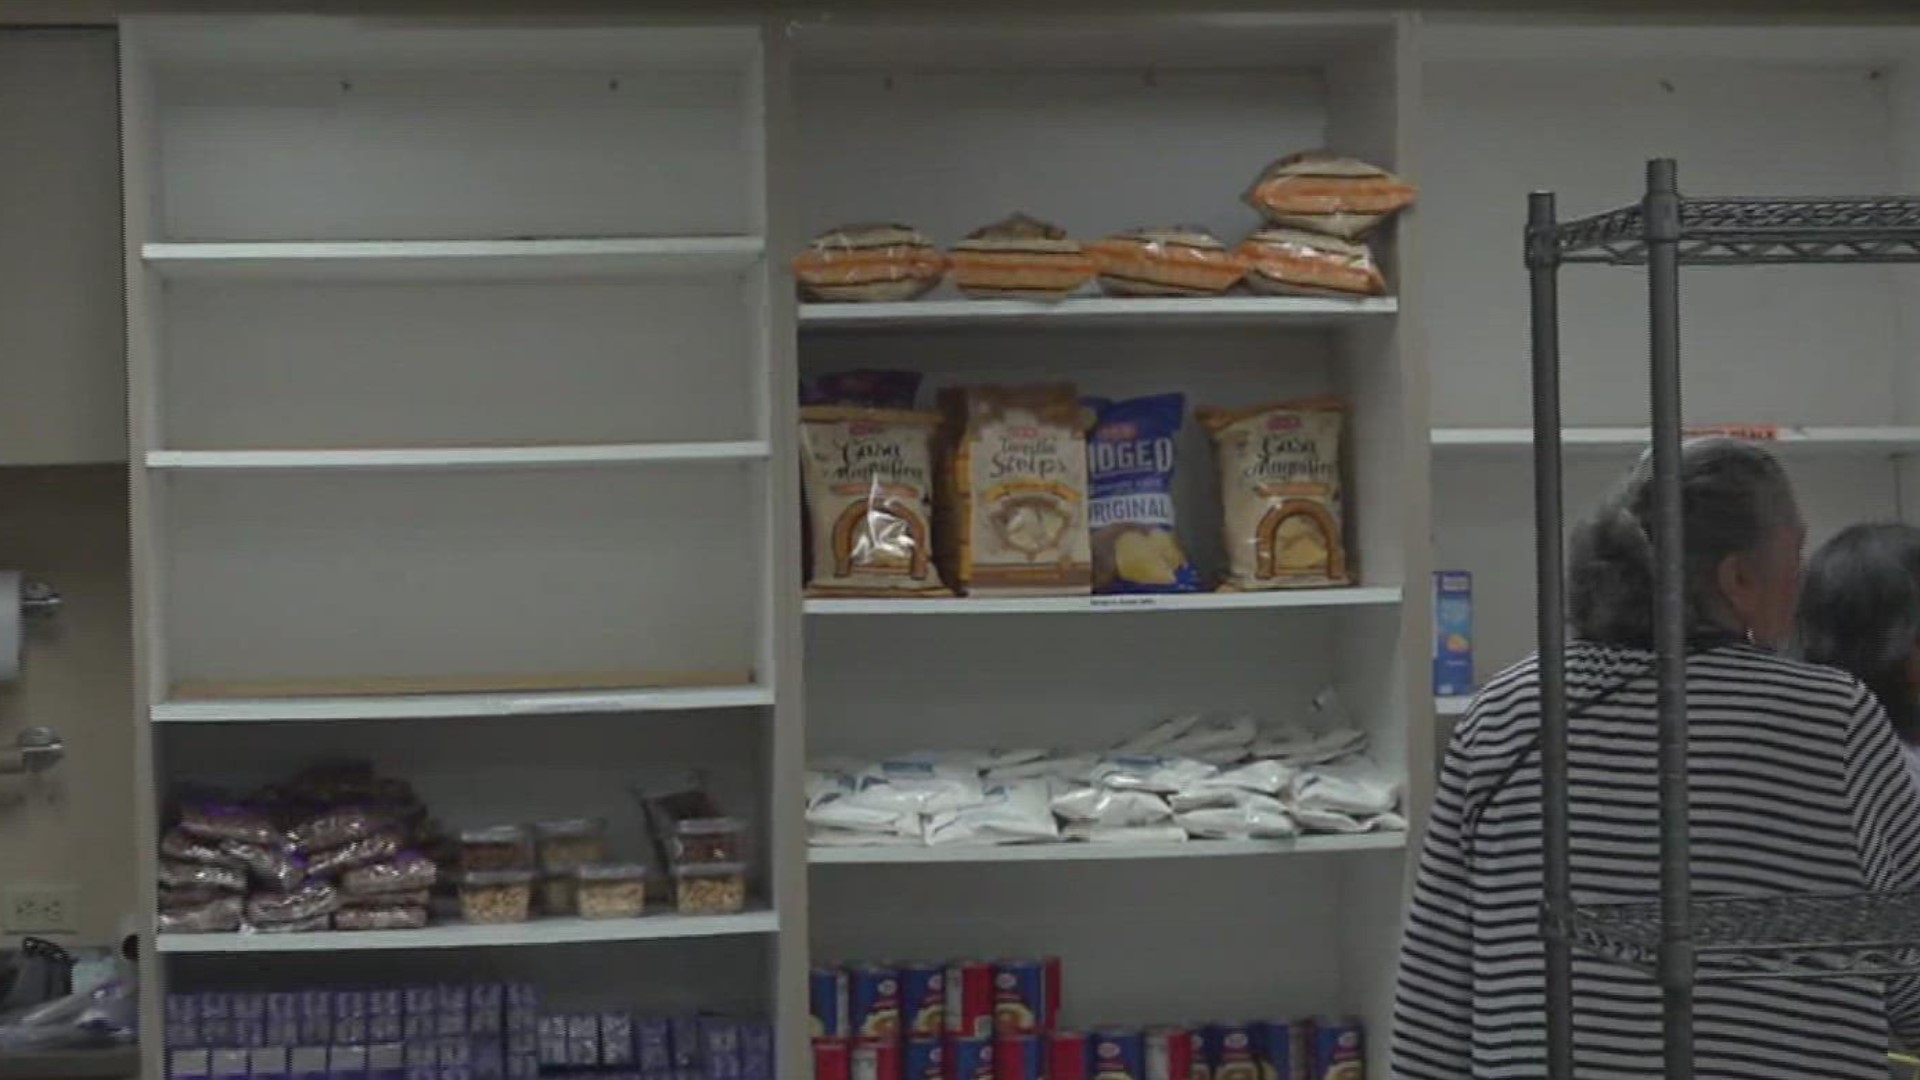 “Last year at this pantry we had we served about 252 families right now where if we look at the same time frame we’re serving 728 families,” said Elma Ortiz.